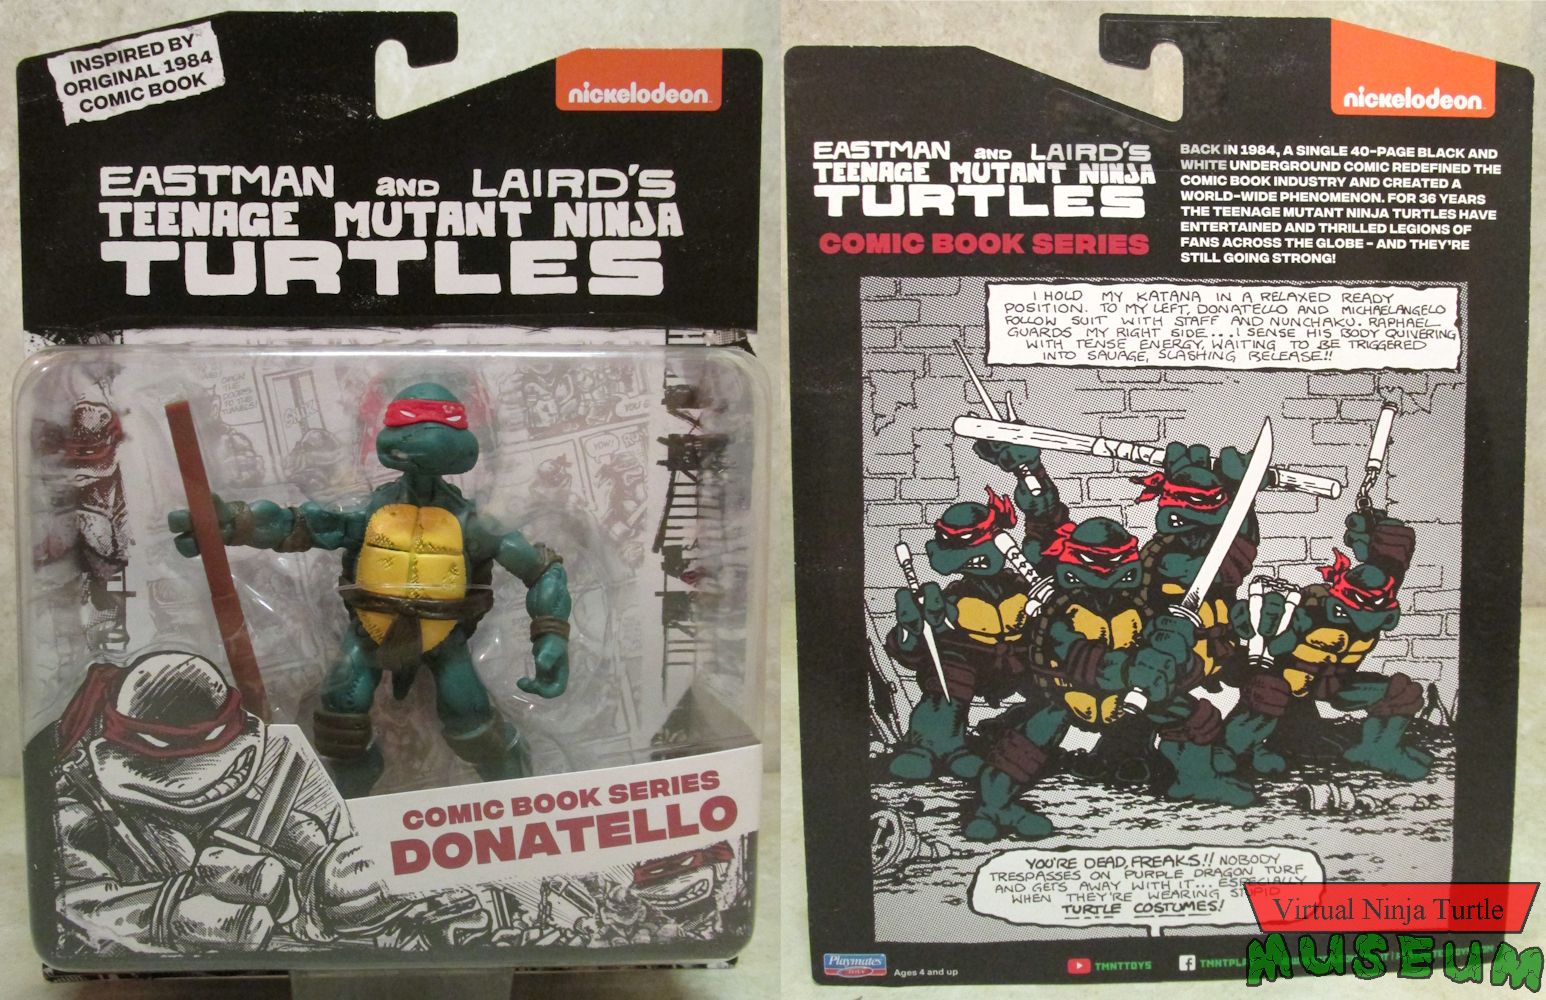 Comic Book Series Donatello MOC front and back